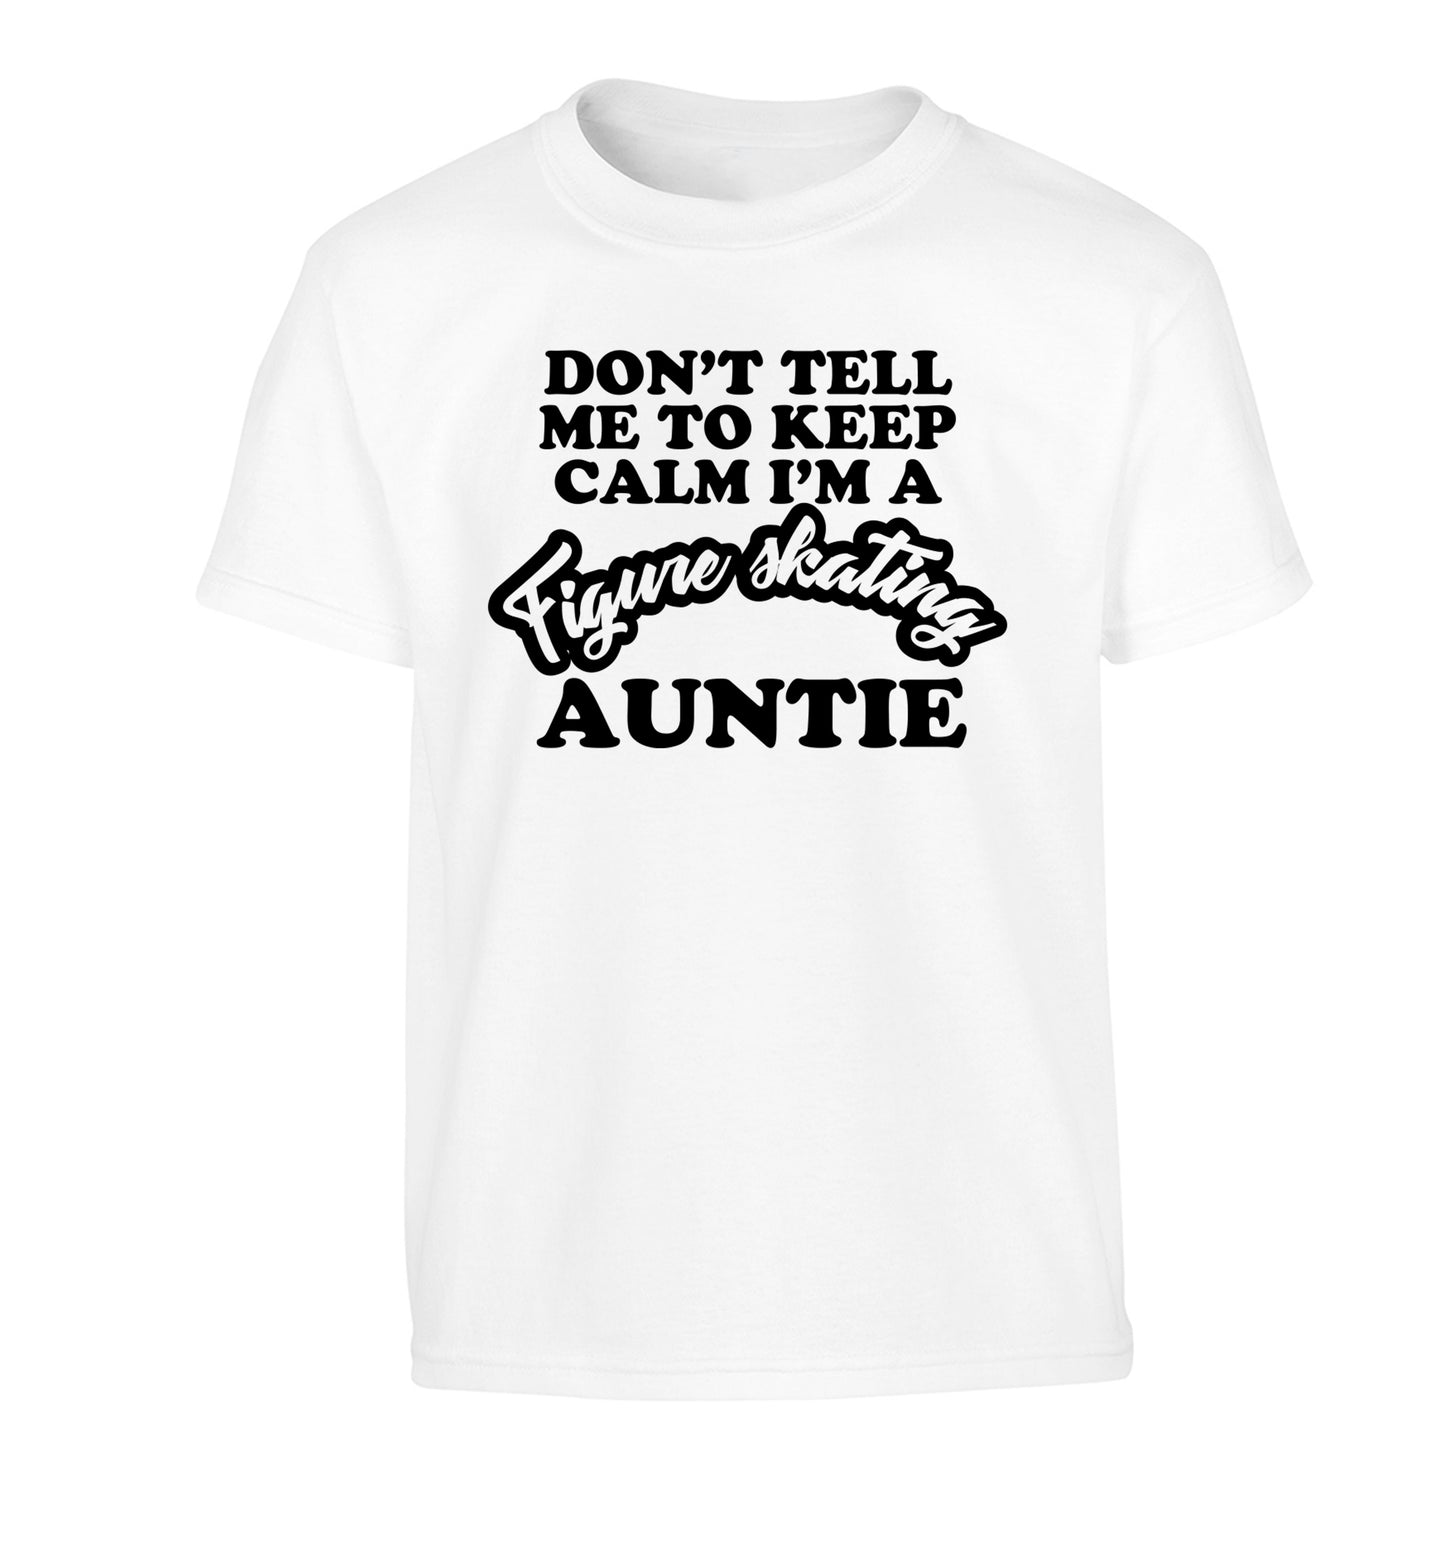 Don't tell me to keep calm I'm a figure skating auntie Children's white Tshirt 12-14 Years